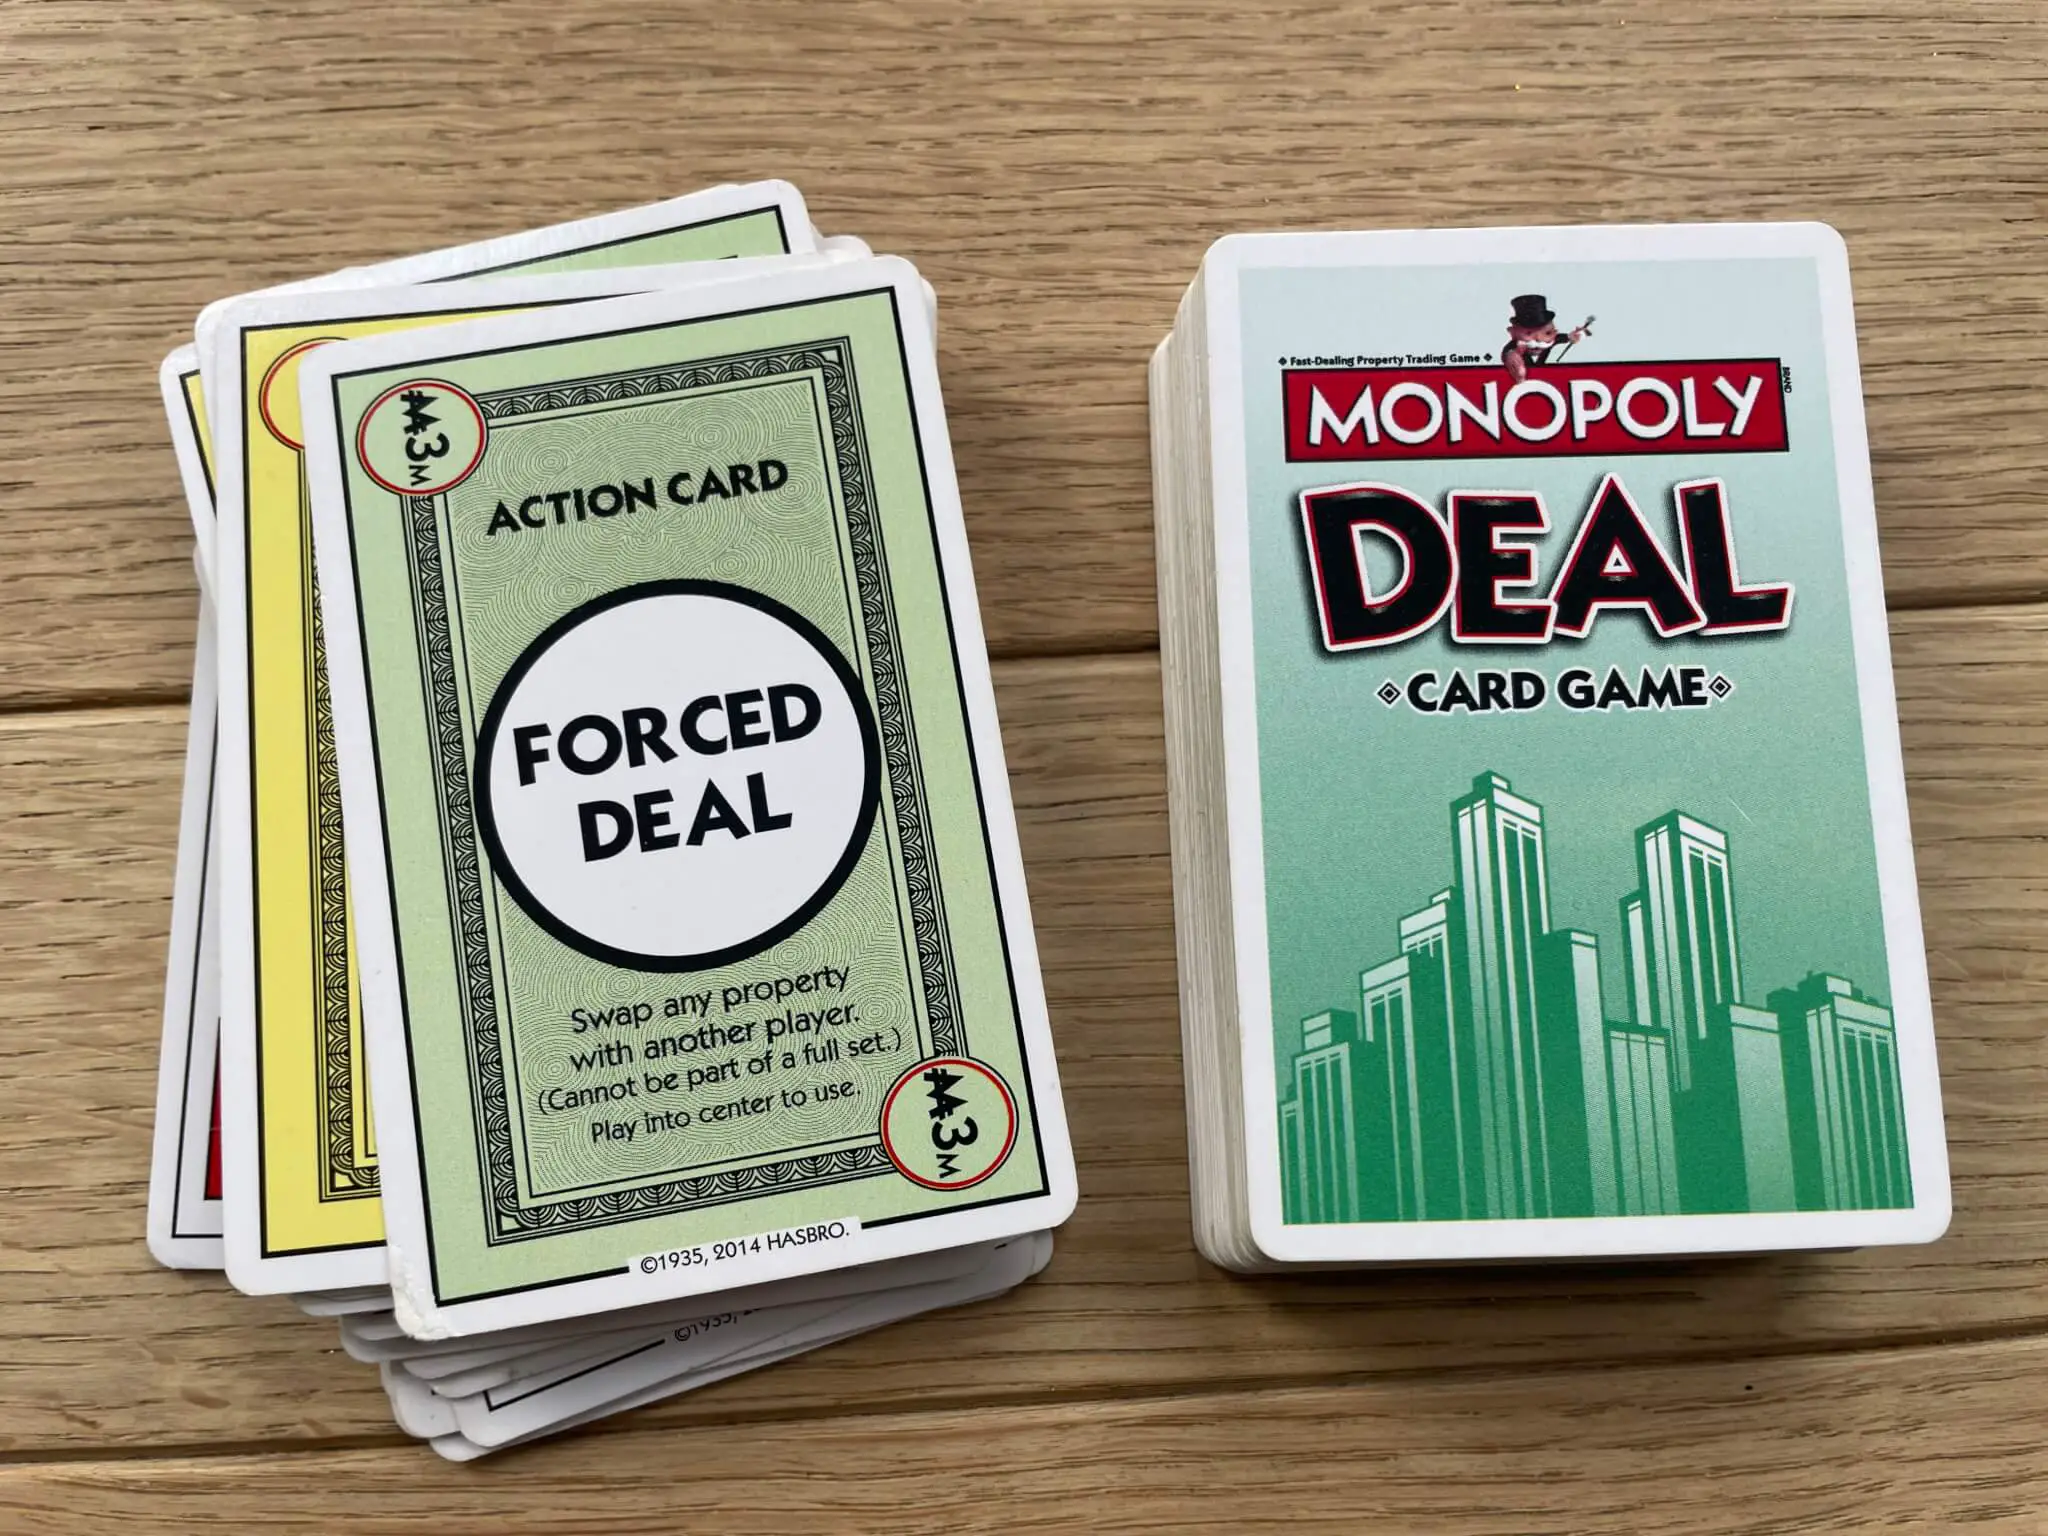 Forced Deal Monopoly Deal Card: Frequently Asked Questions